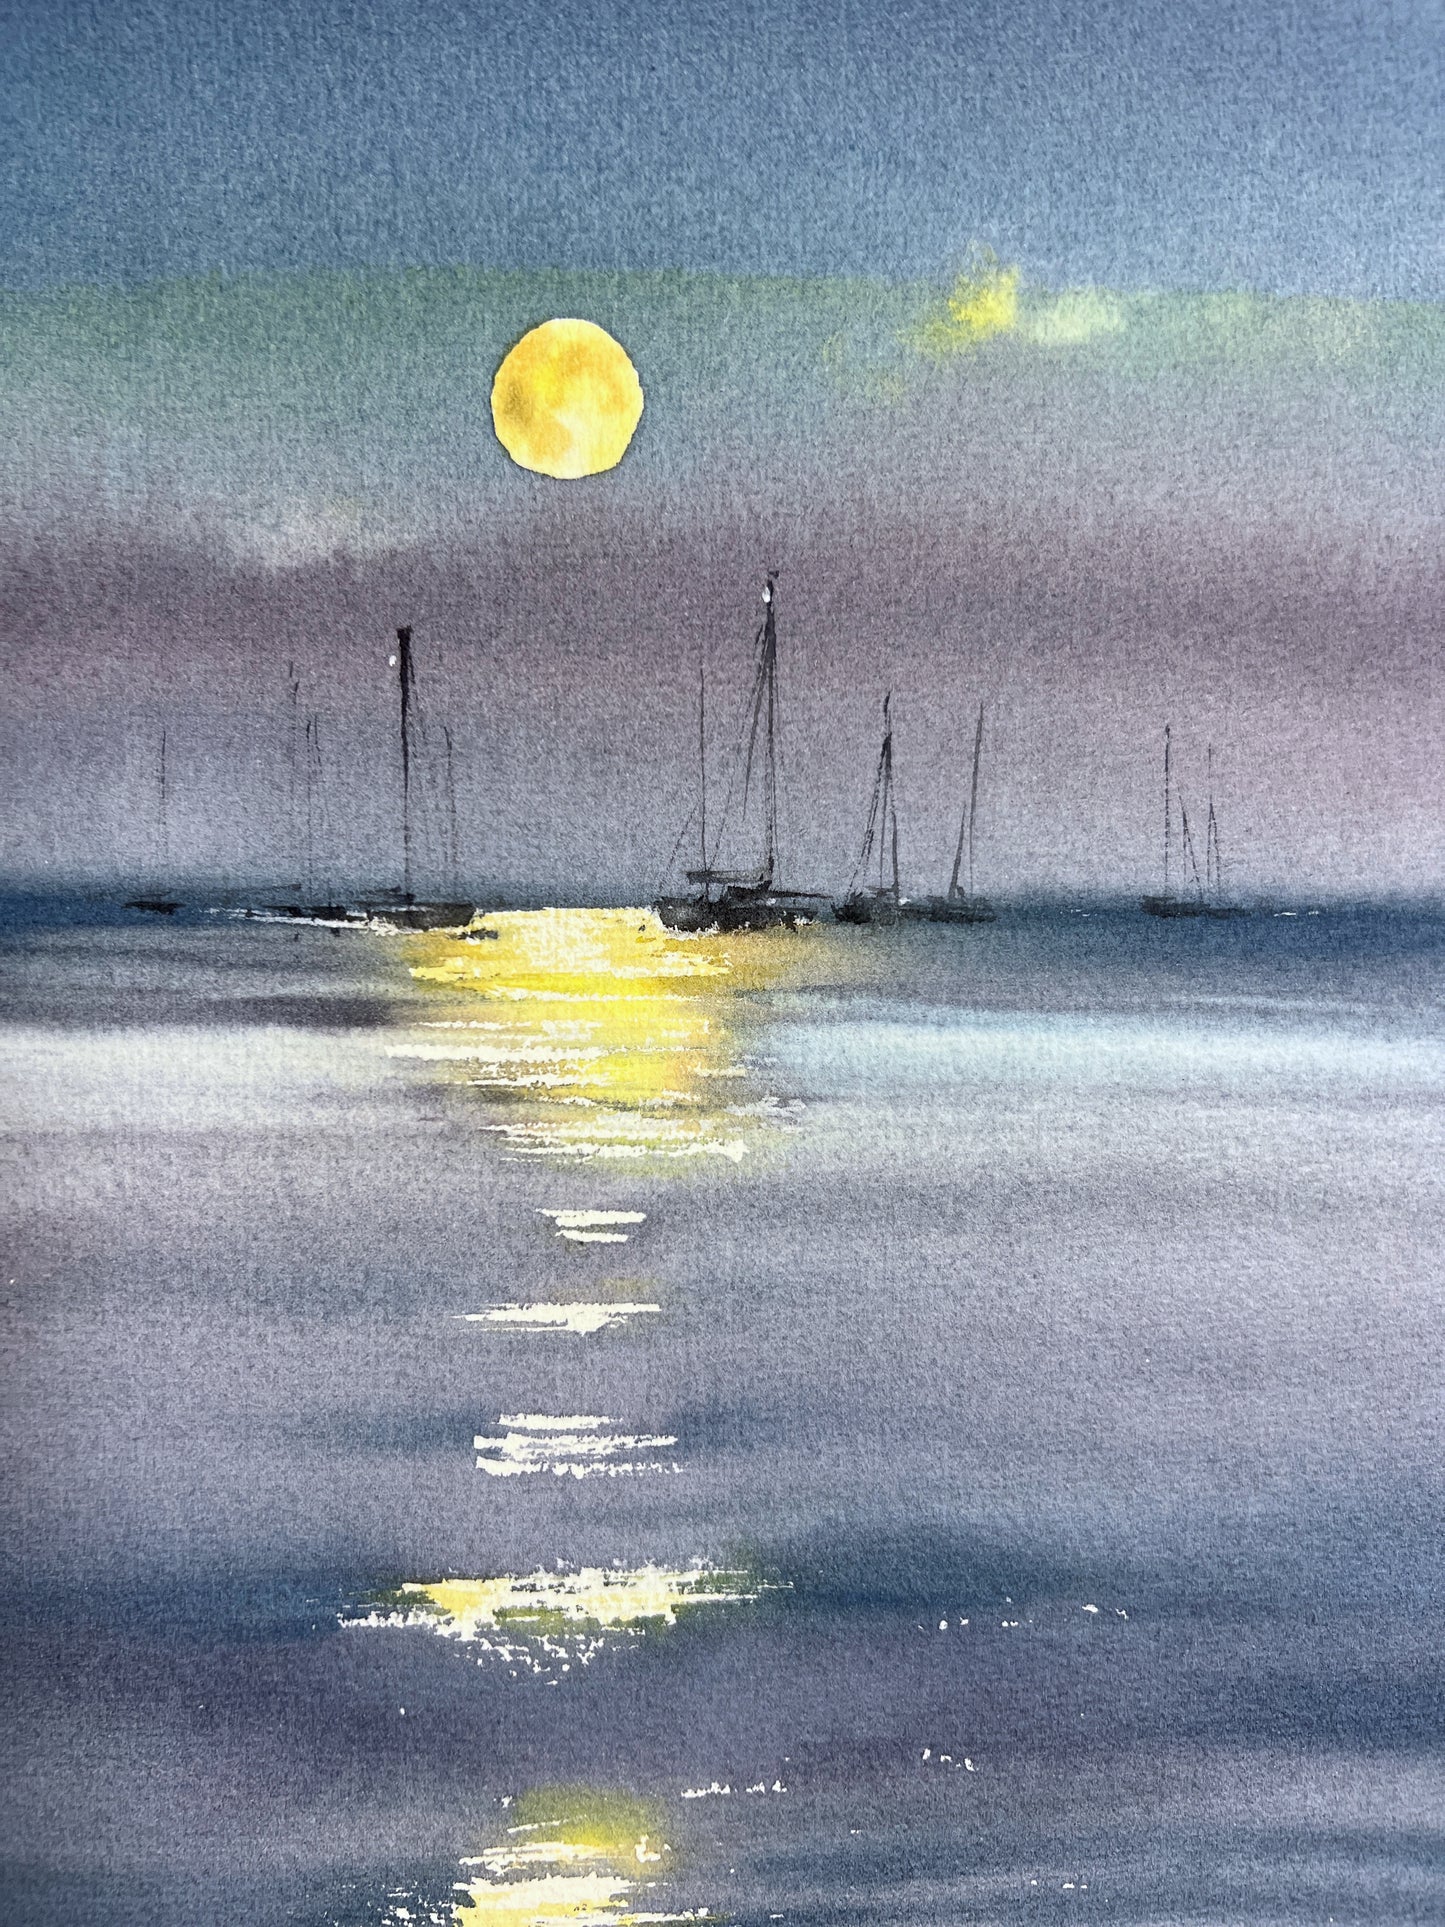 Original Watercolor Painting 'In the Moonlight #14' - Yachts in Lunar Path 9x12 in